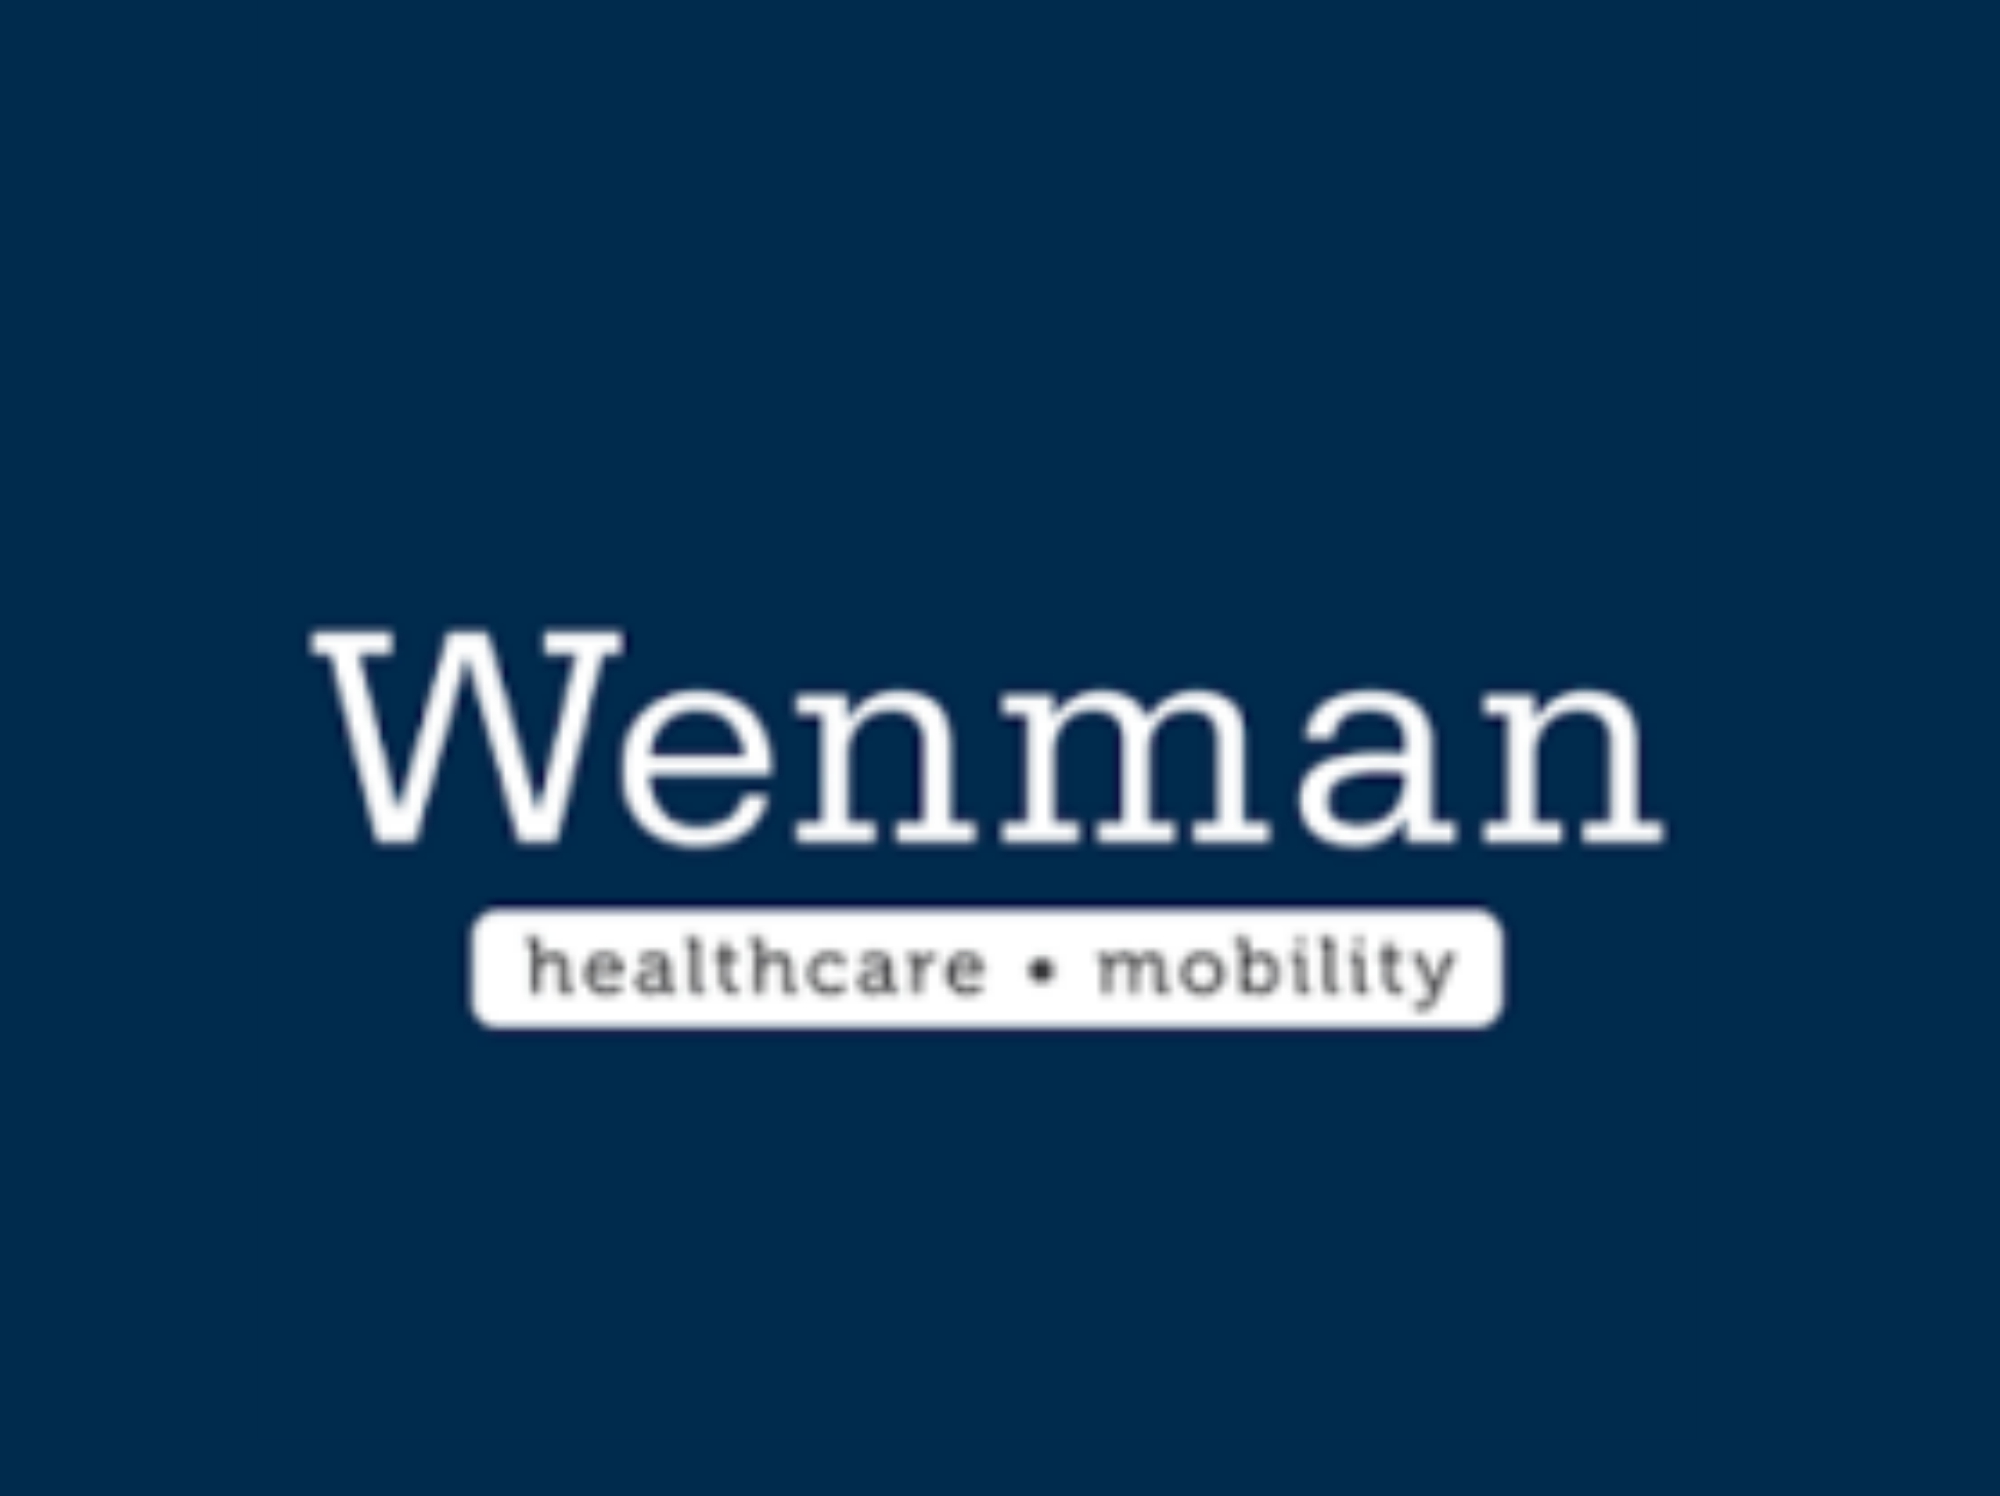 Wenman Healthcare Ltd Maintain Services during Covid-19